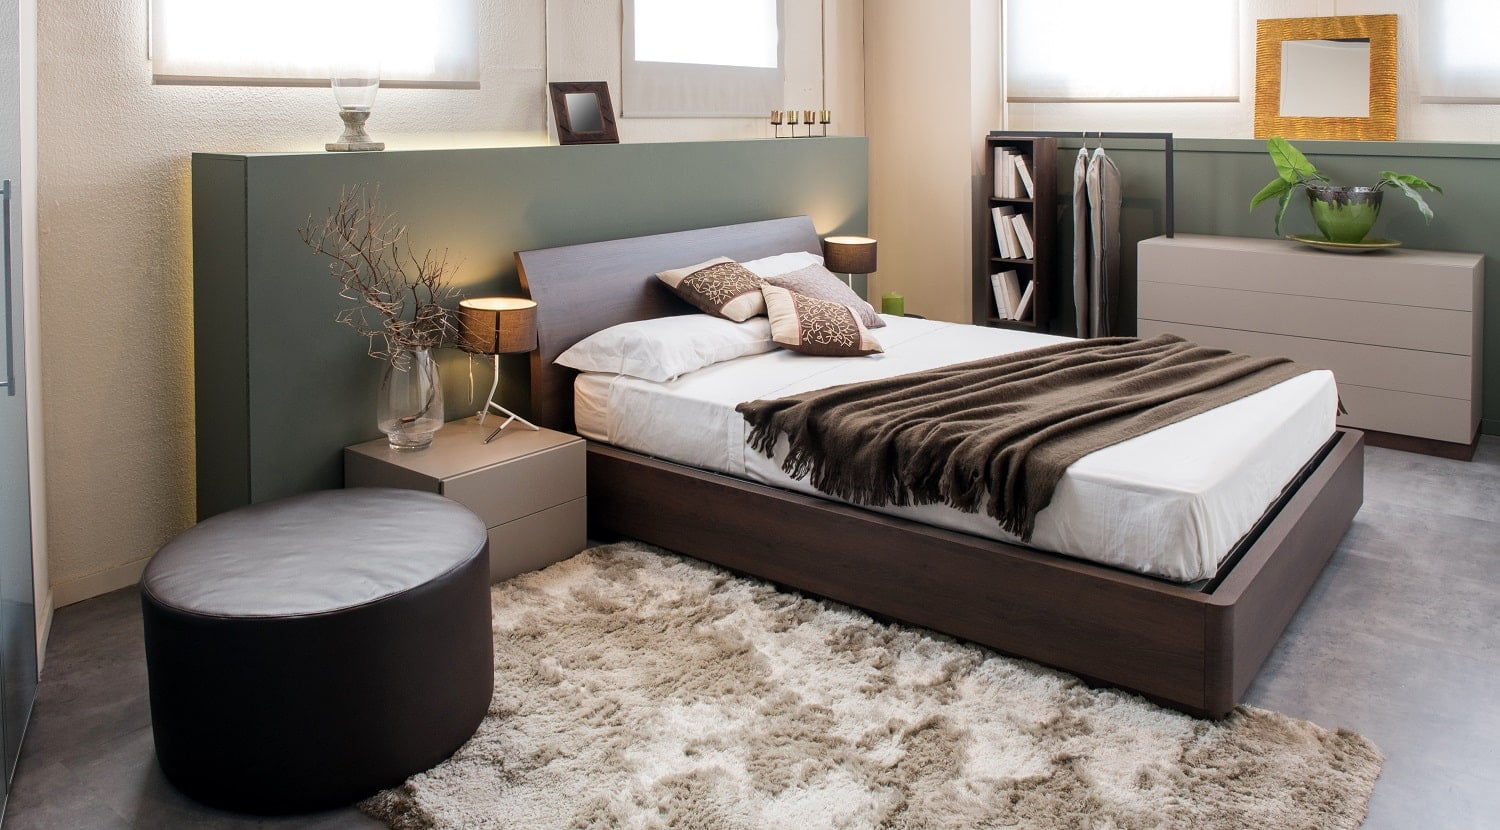 Modern luxury brown monochrome bedroom interior with large headboard above a double beds with cabinets, ottoman and built in wardrobe